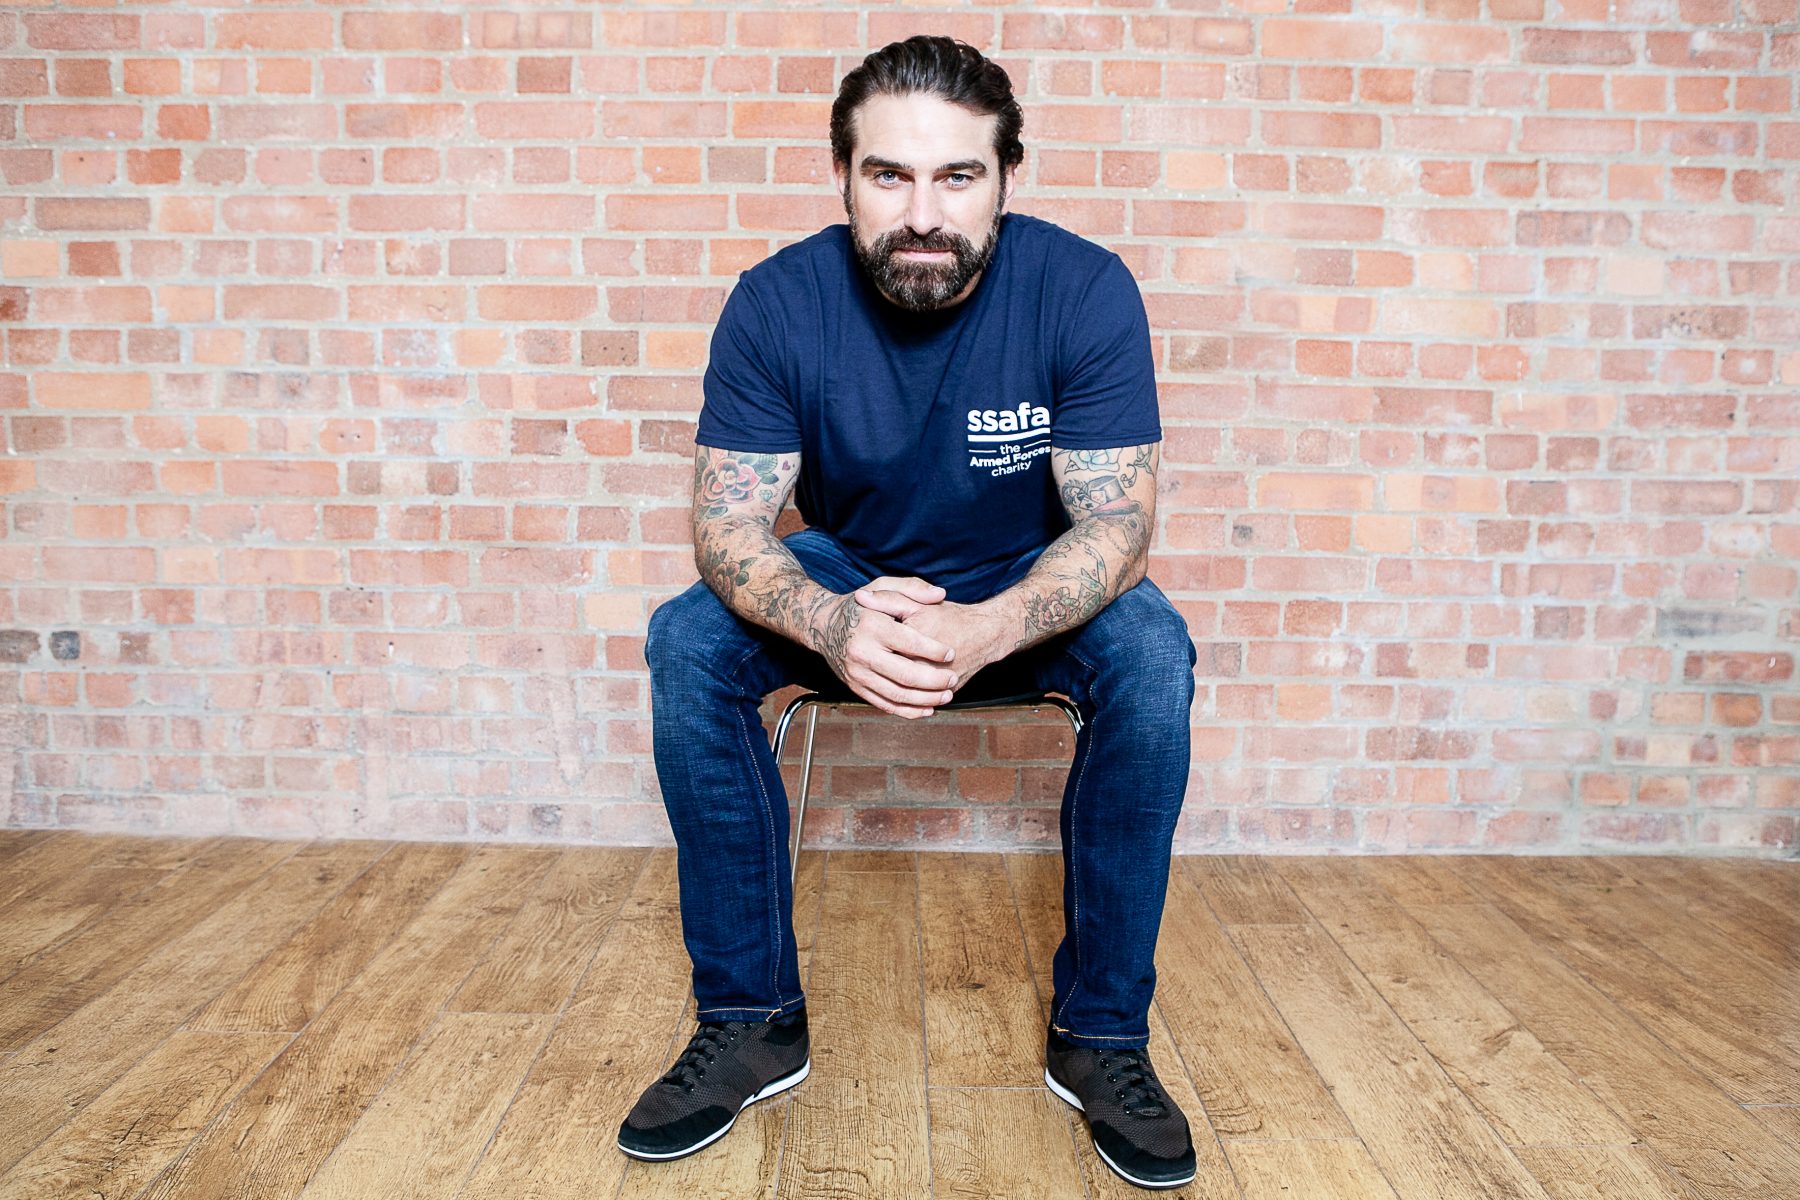 Ant Middleton Fund launched to help veterans get back on their feet